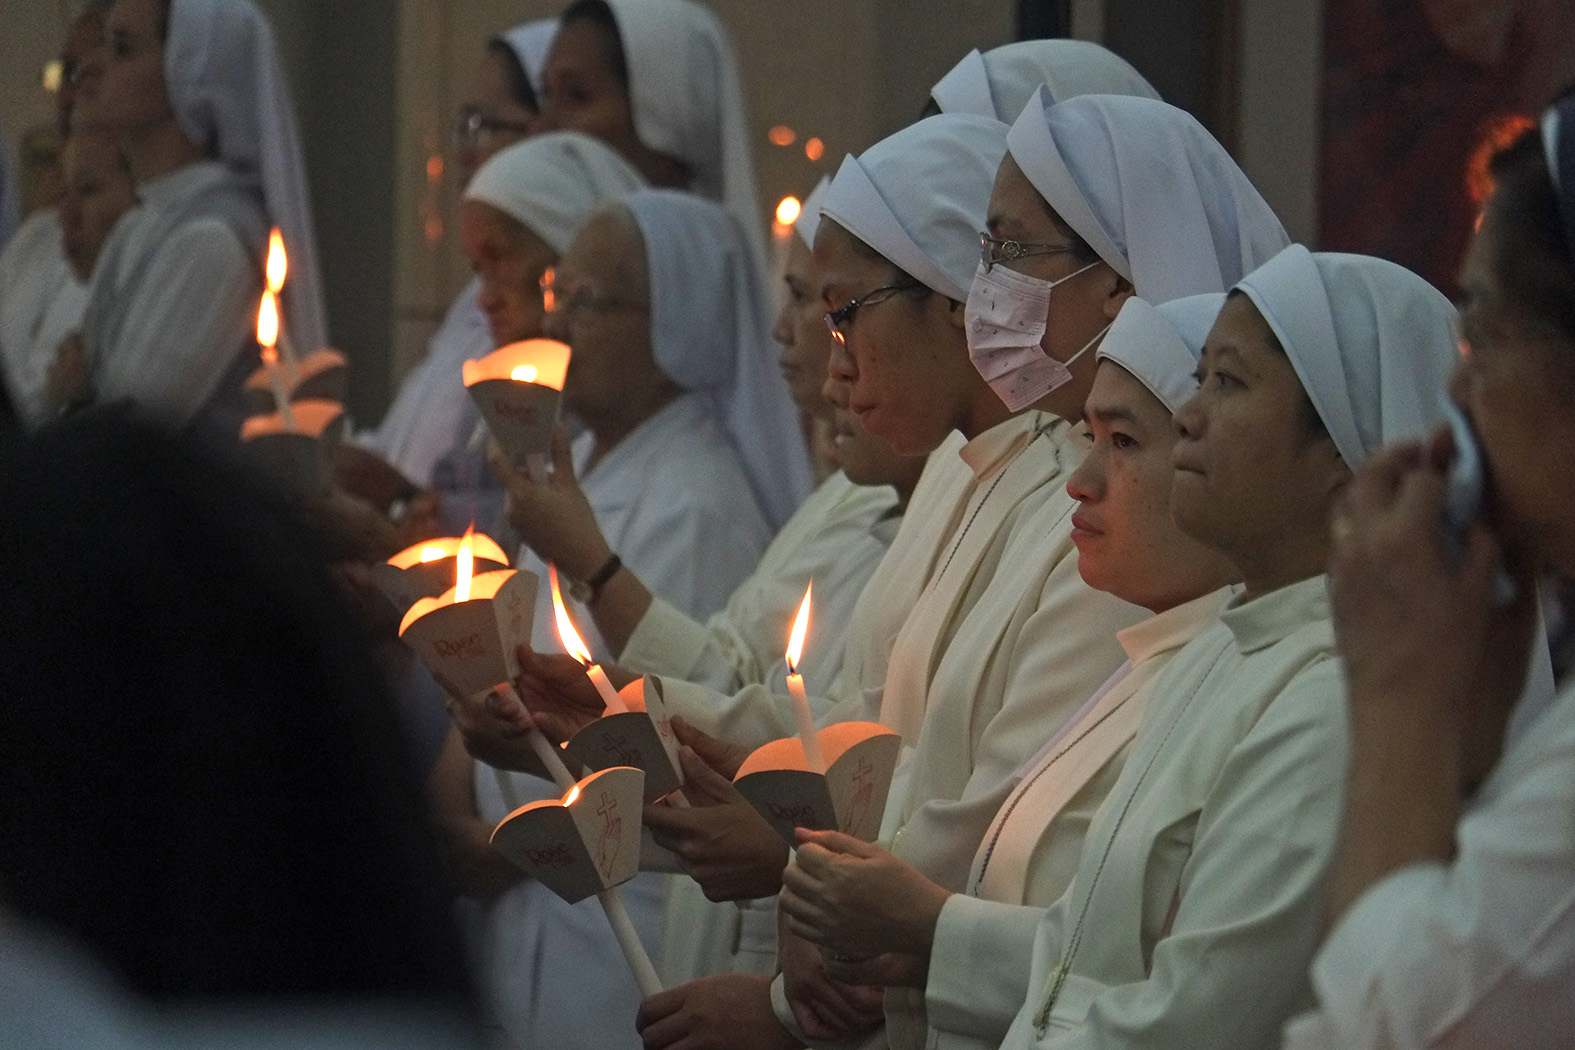 Nuns hearing mass in the Philippines. Photo: CBCP News/FB